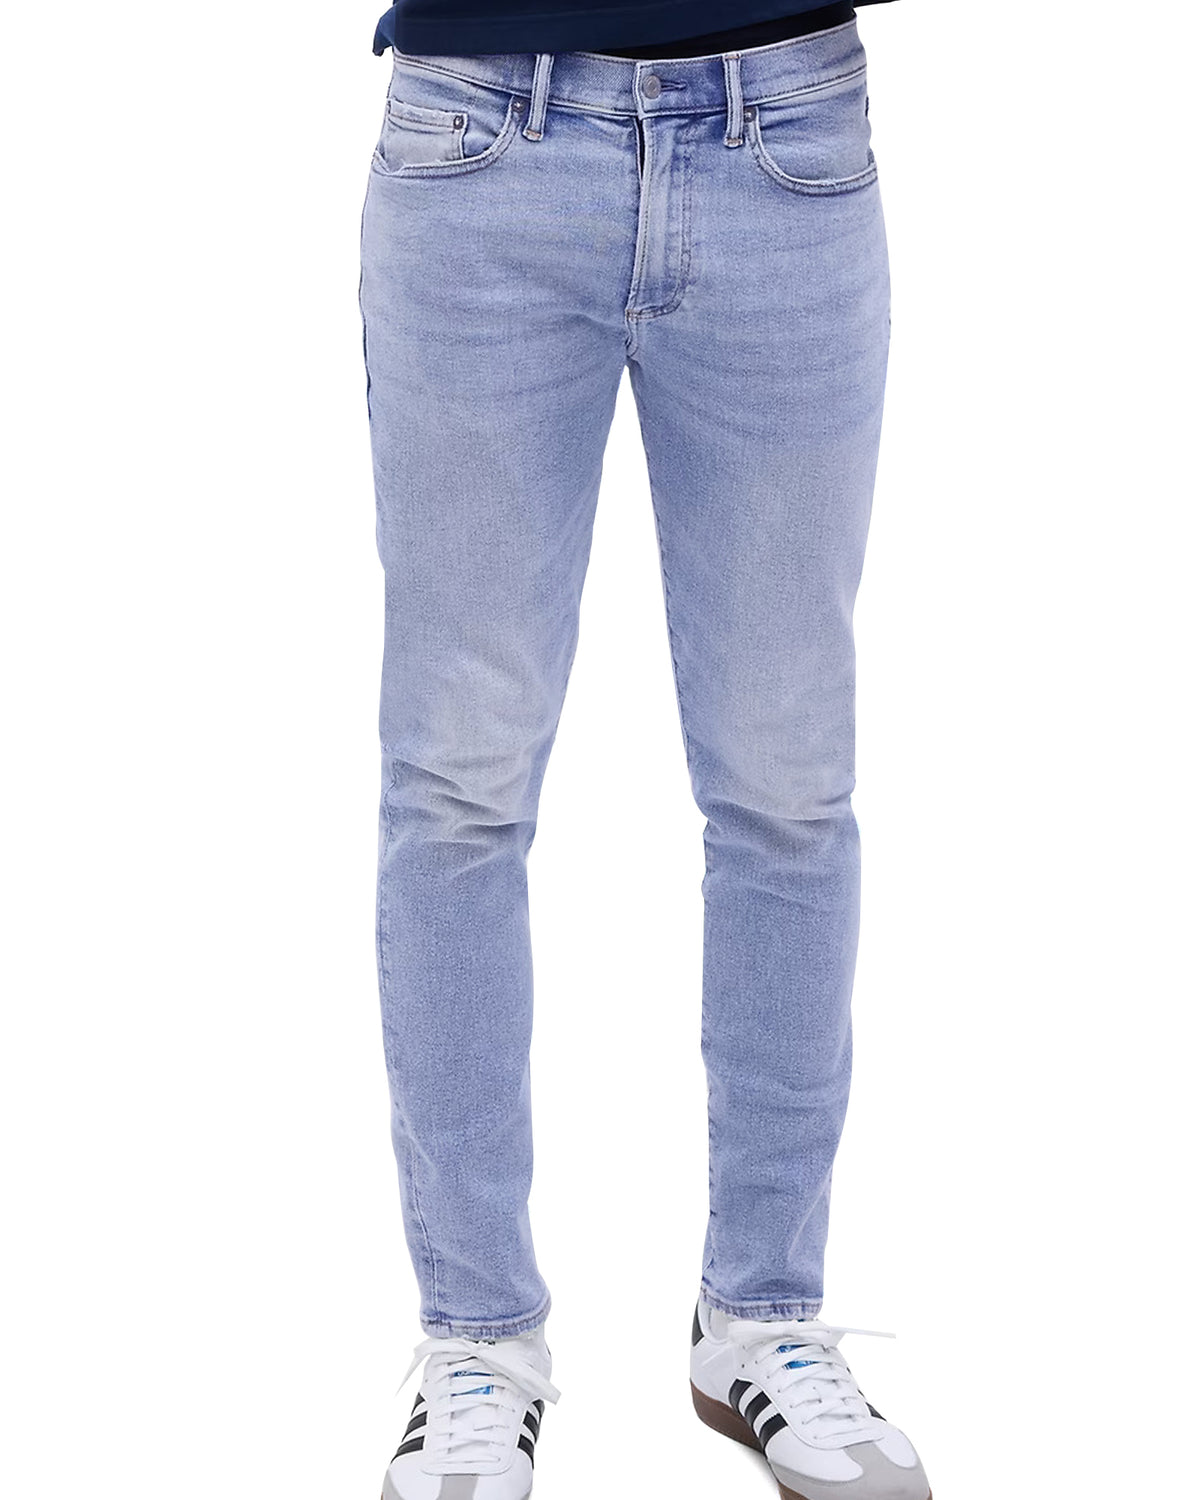 Men's Solid Casual Jeans